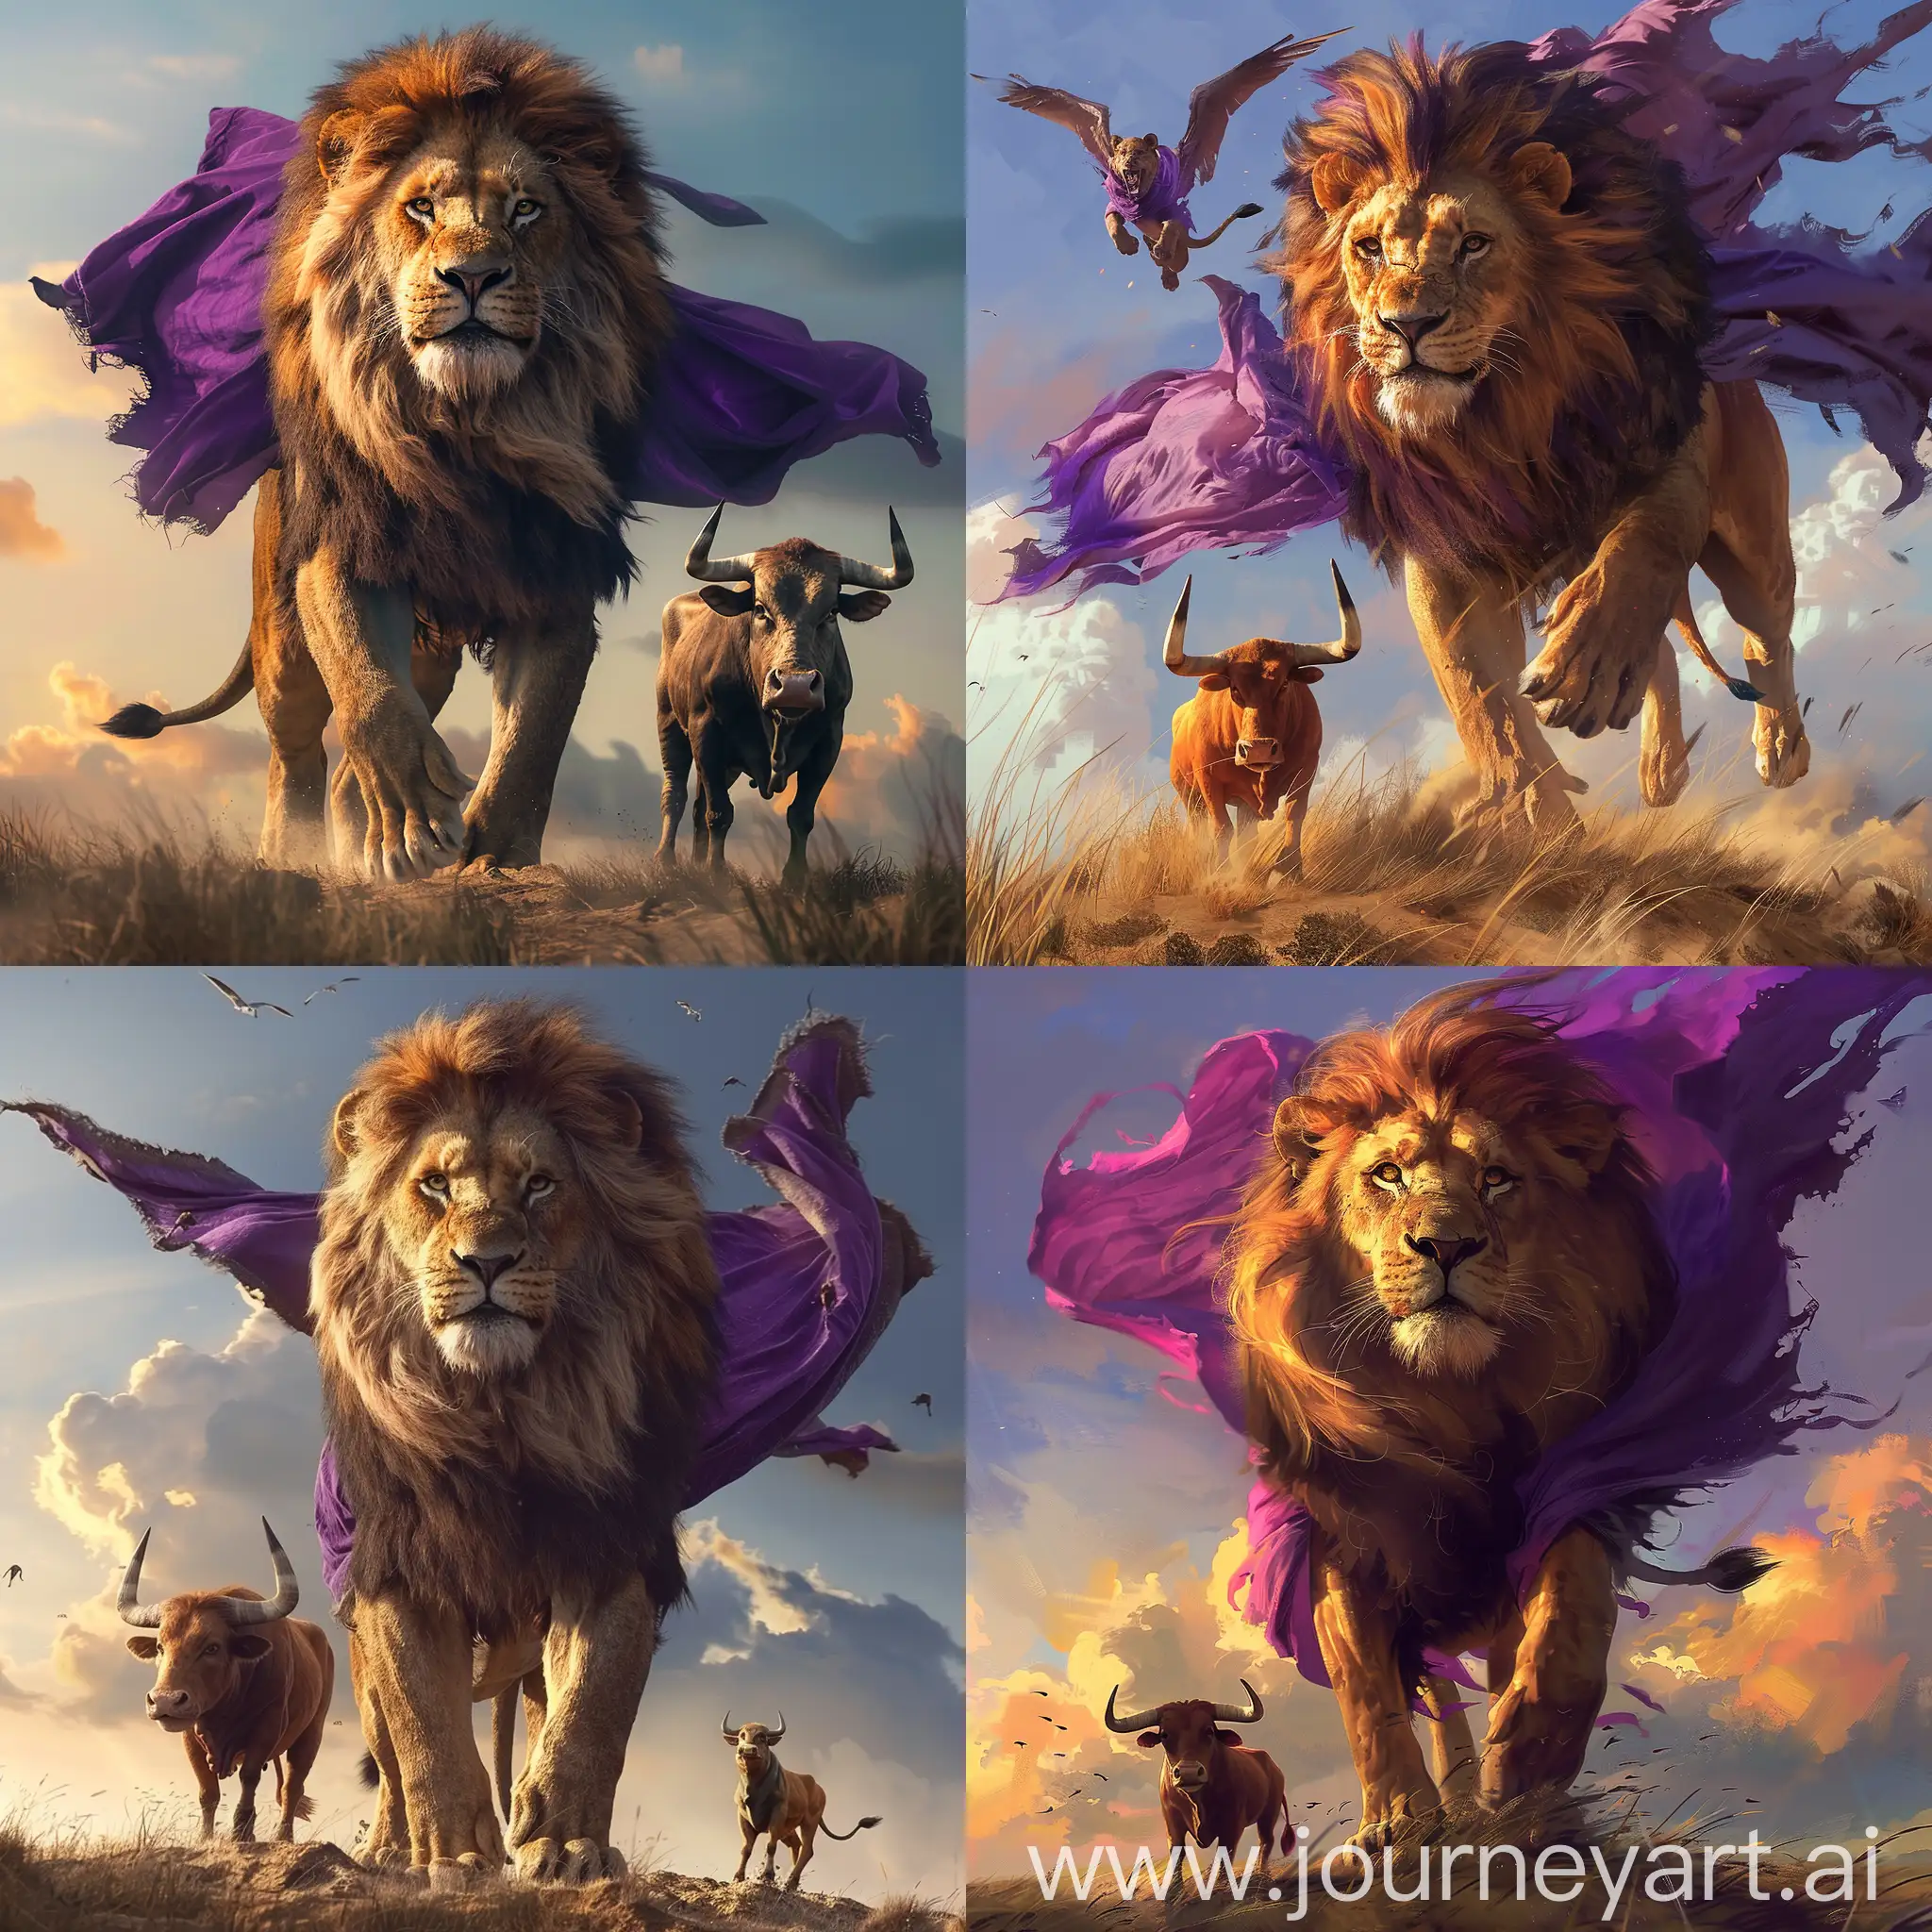 big male lion with a purple cloak that float in in the air, a smaller bull looking at him front of him